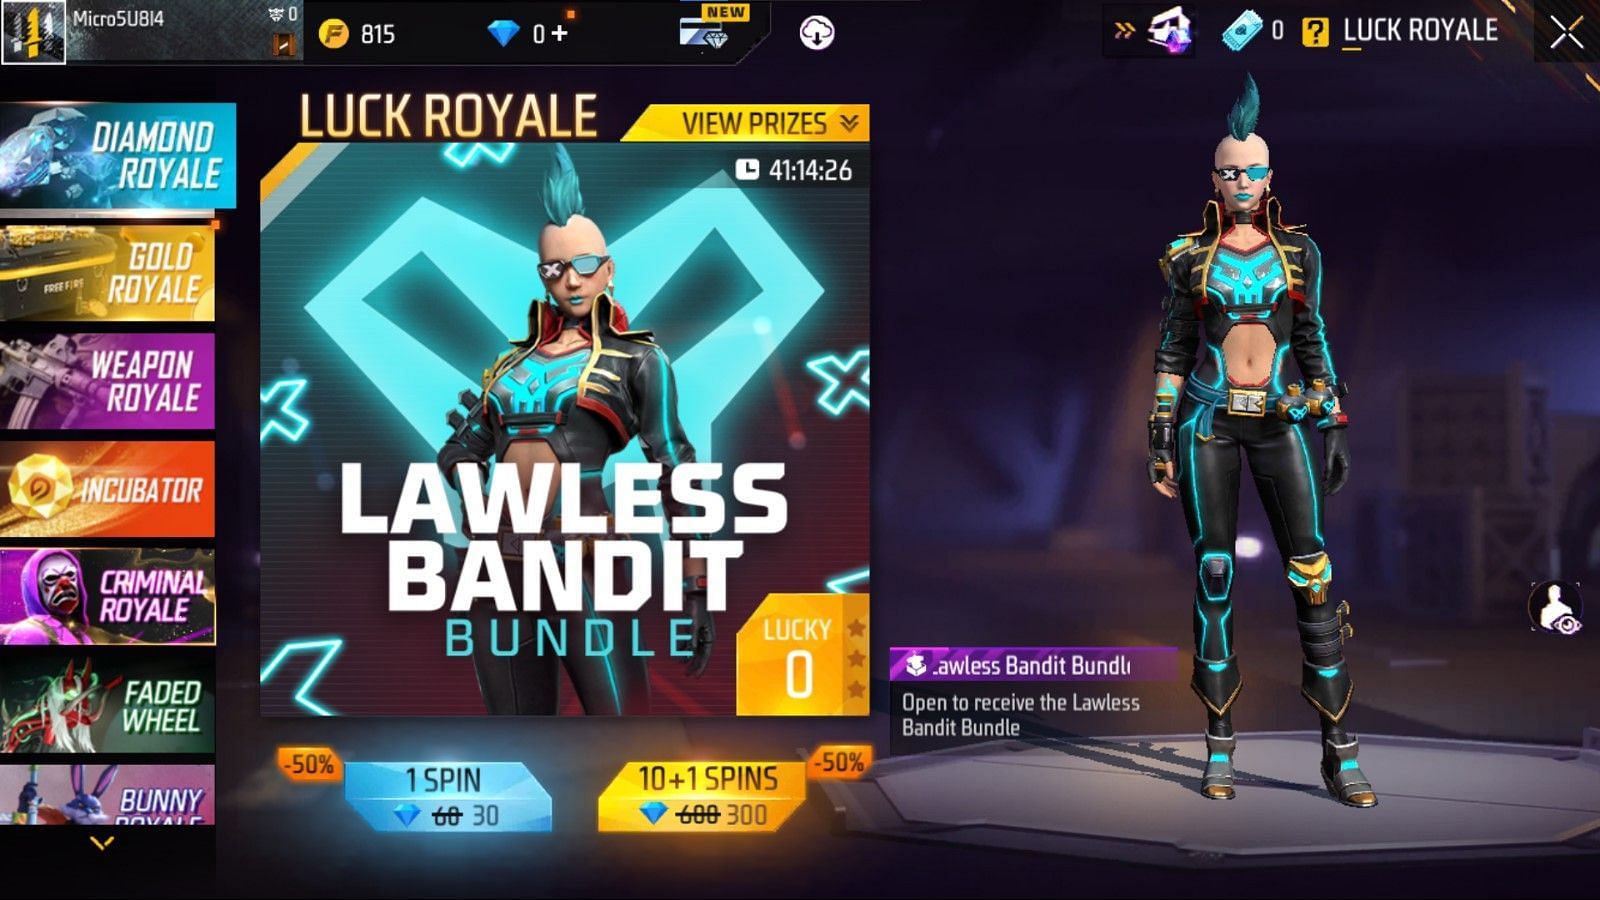 Users should hurry as this particular bundle will not stay long in the luck royale (Image via Garena)